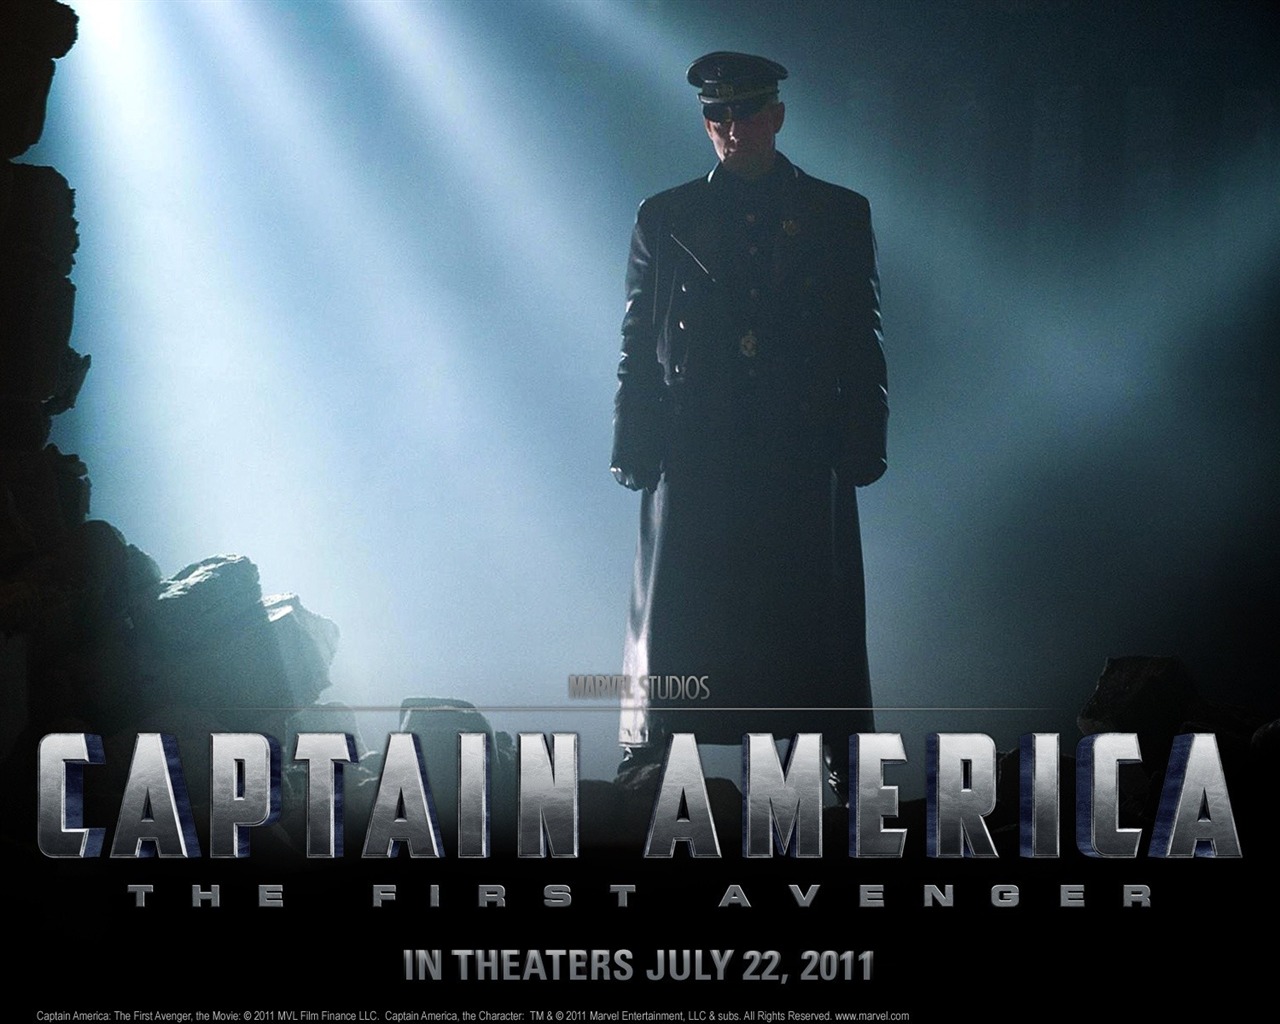 Captain America: The First Avenger wallpapers HD #19 - 1280x1024